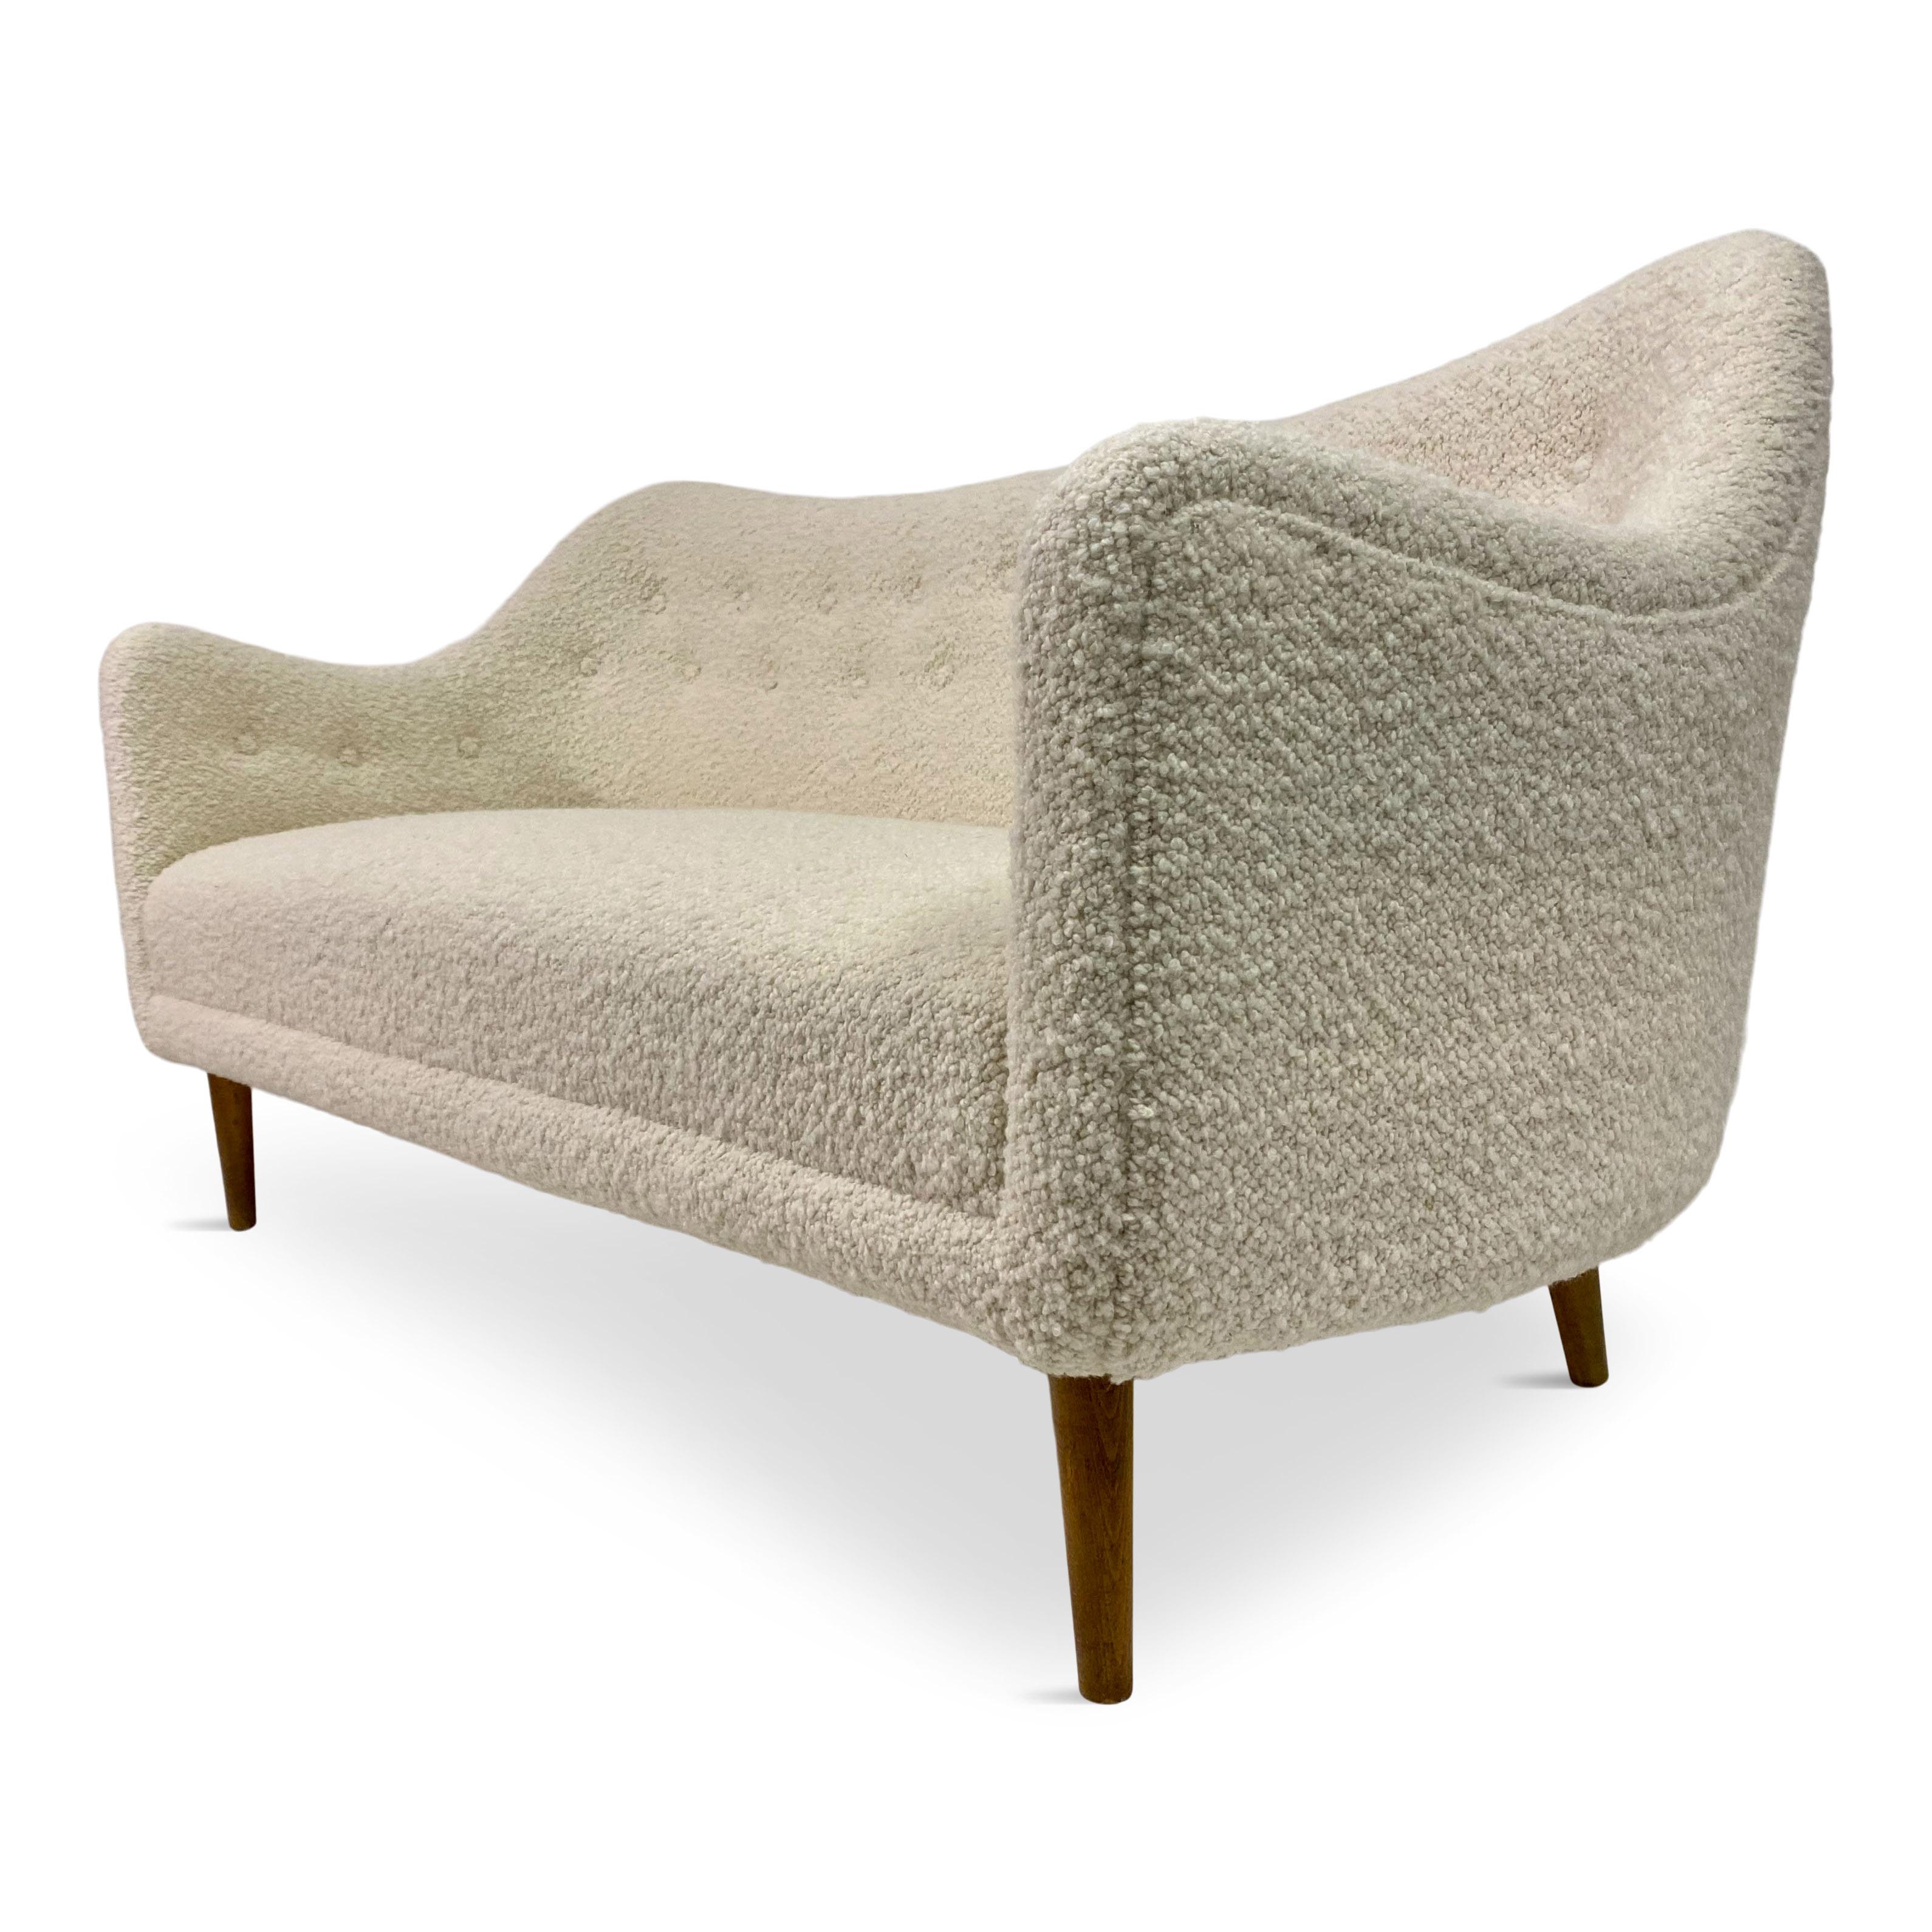 BO64 sofa

By Finn Juhl for Bovirke

Restored and newly upholstered in Designers Guild Boucle

Beech frame

Buttoned back and sides

Seat height 42cm

Mid Century Denmark.